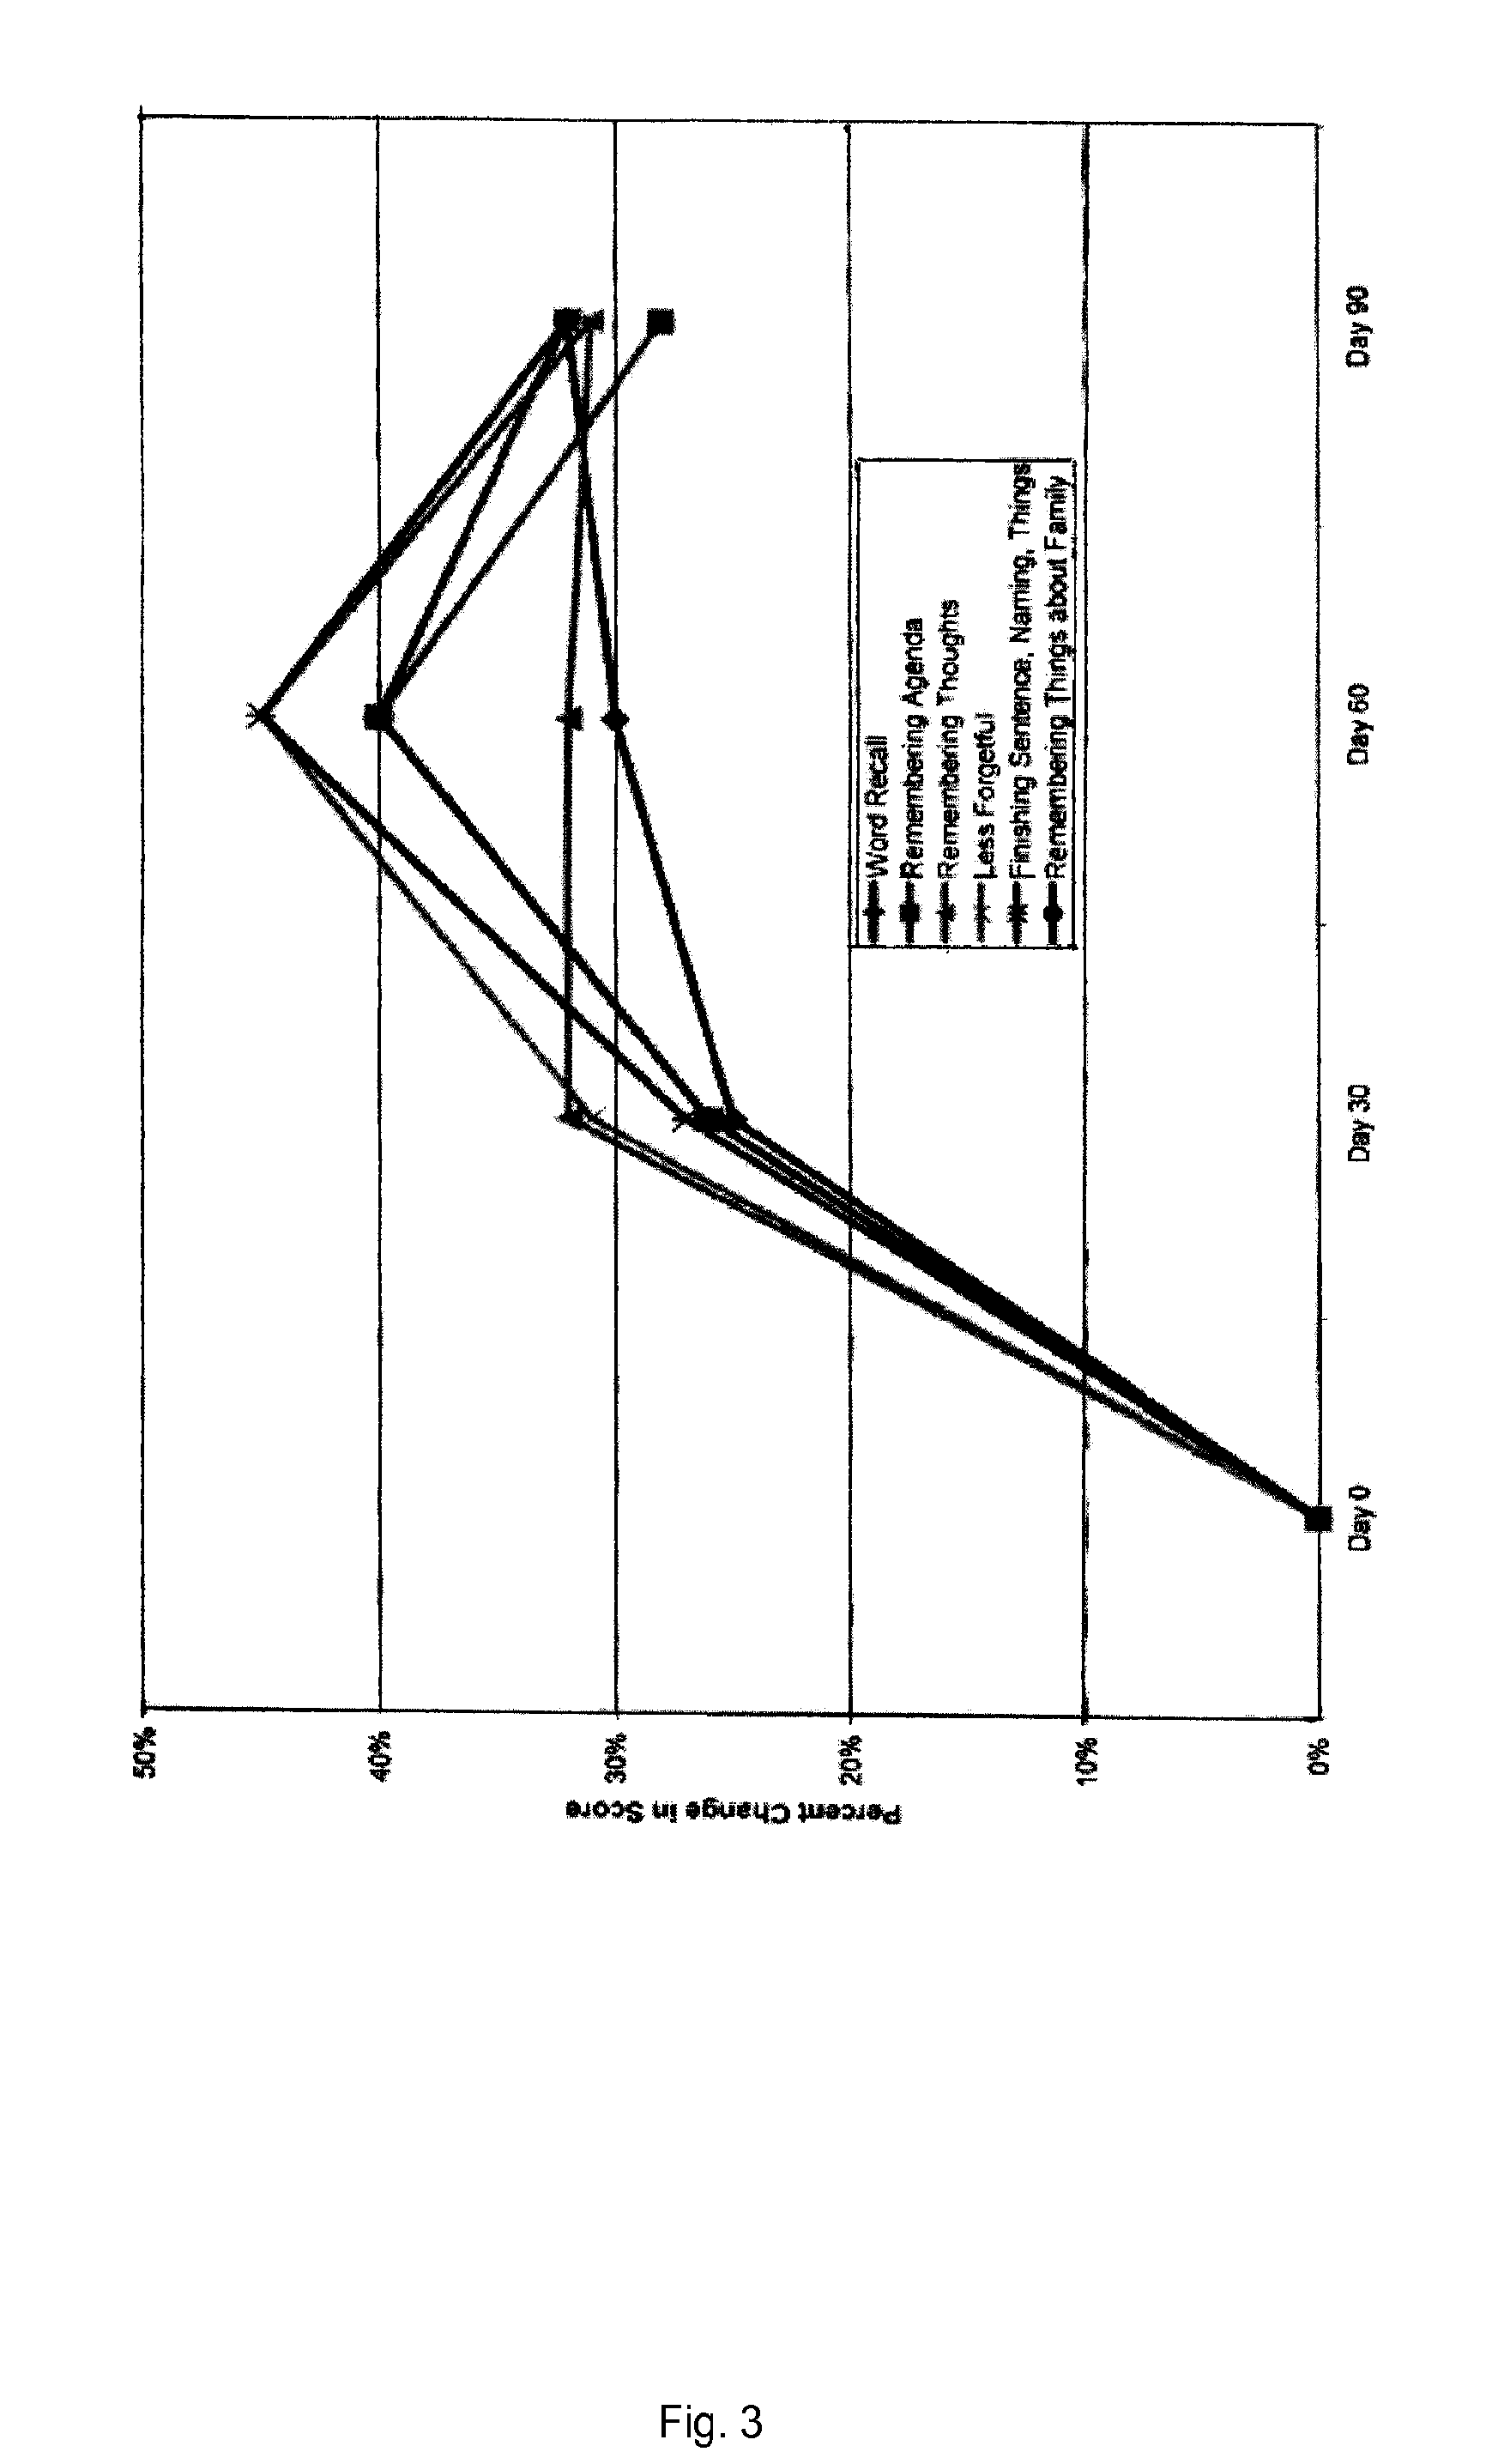 Apoaequorin-containing compositions and methods of using same